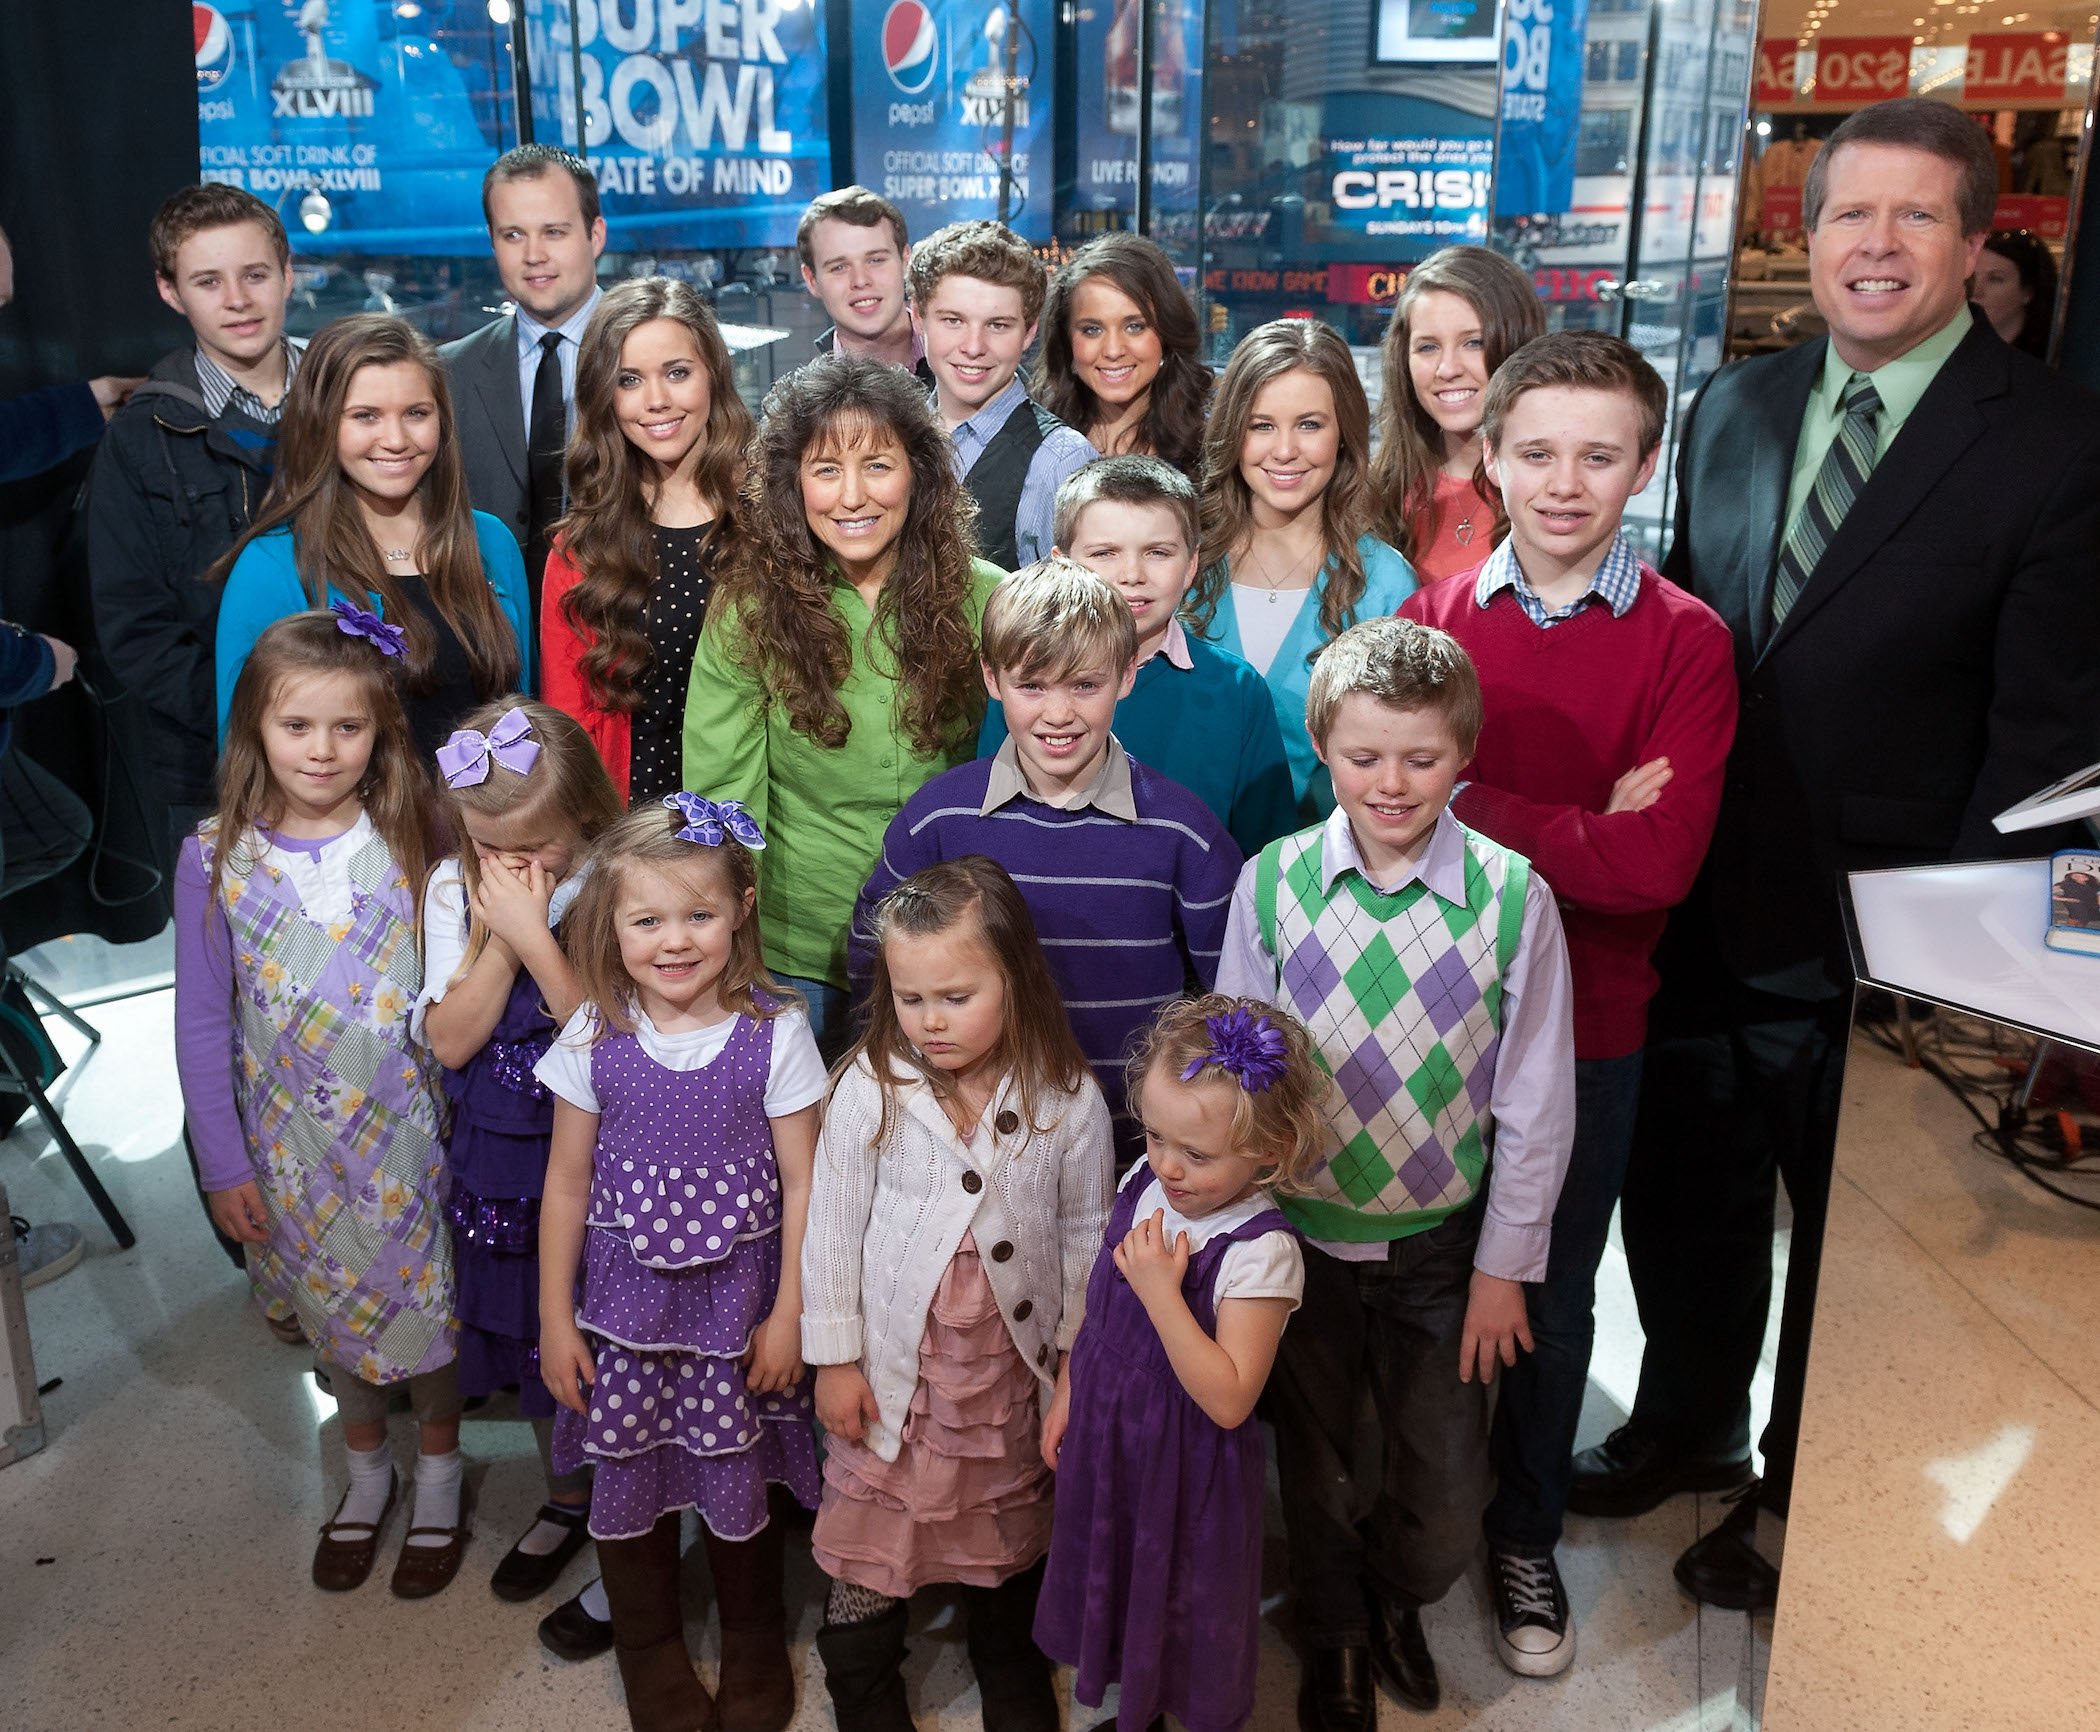 The Duggar family visits 'Extra' to share the latest Duggar news. The Duggar family courtships made the supersized clan famous 